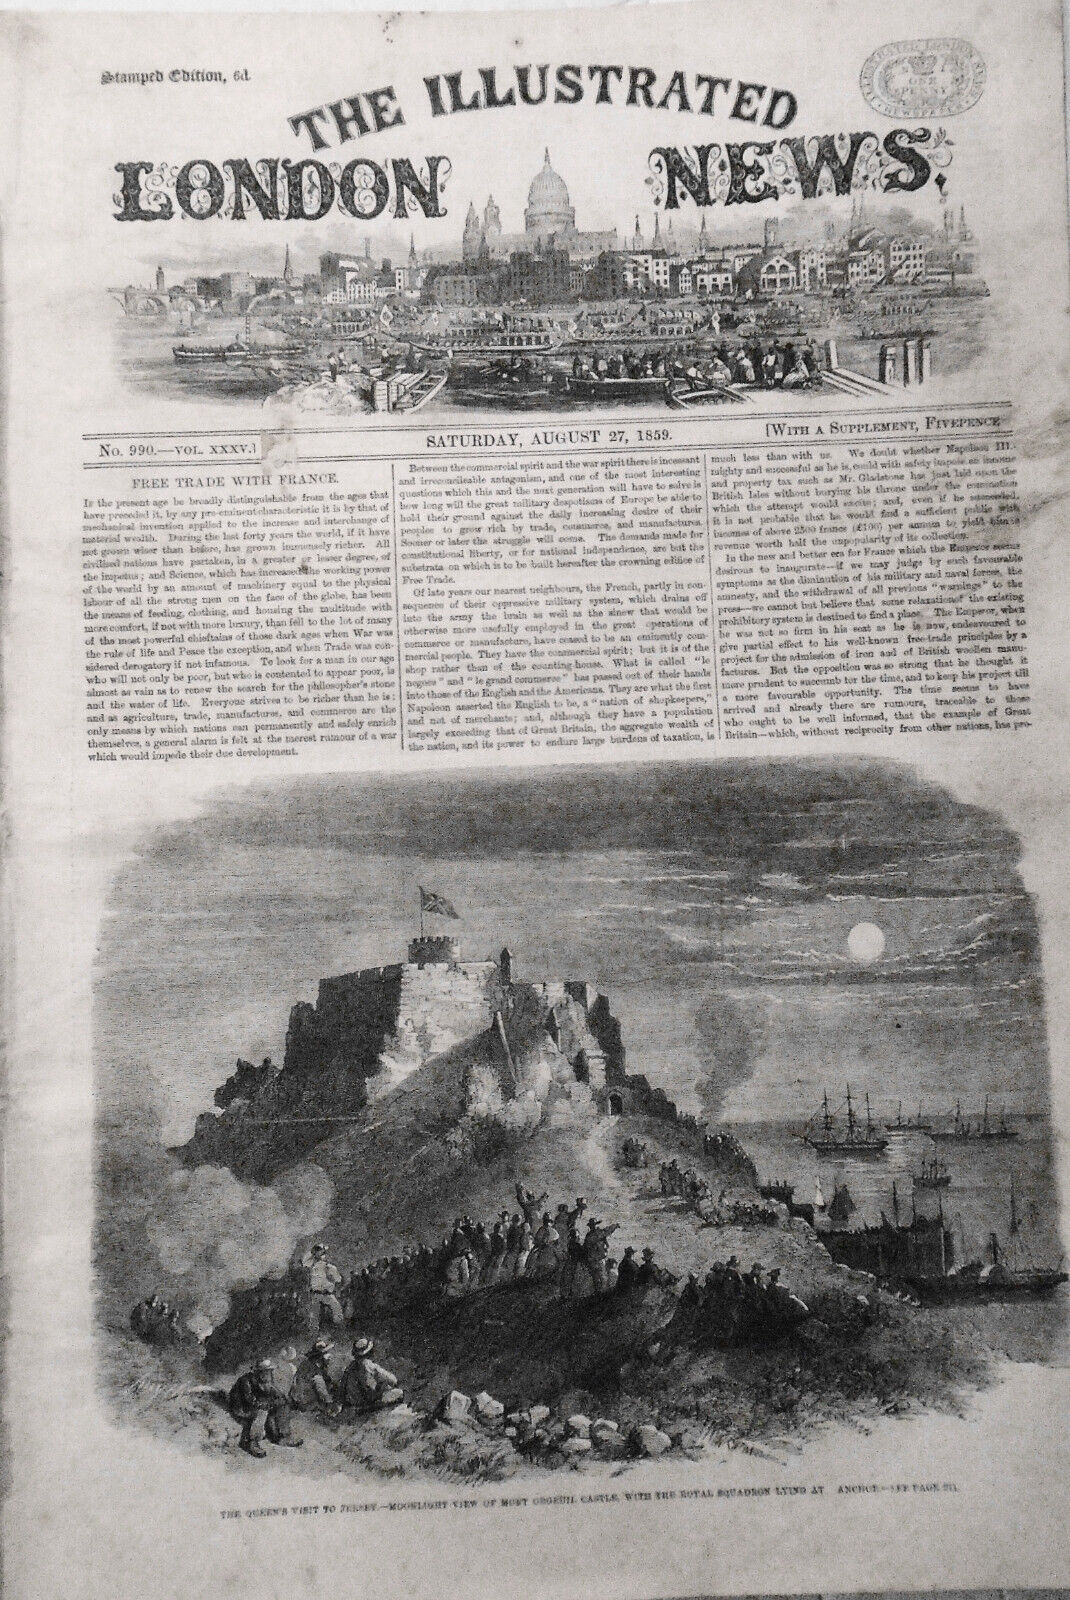 The Illustrated London News, August 27, 1859 - Army of Italy in Paris; fetes etc